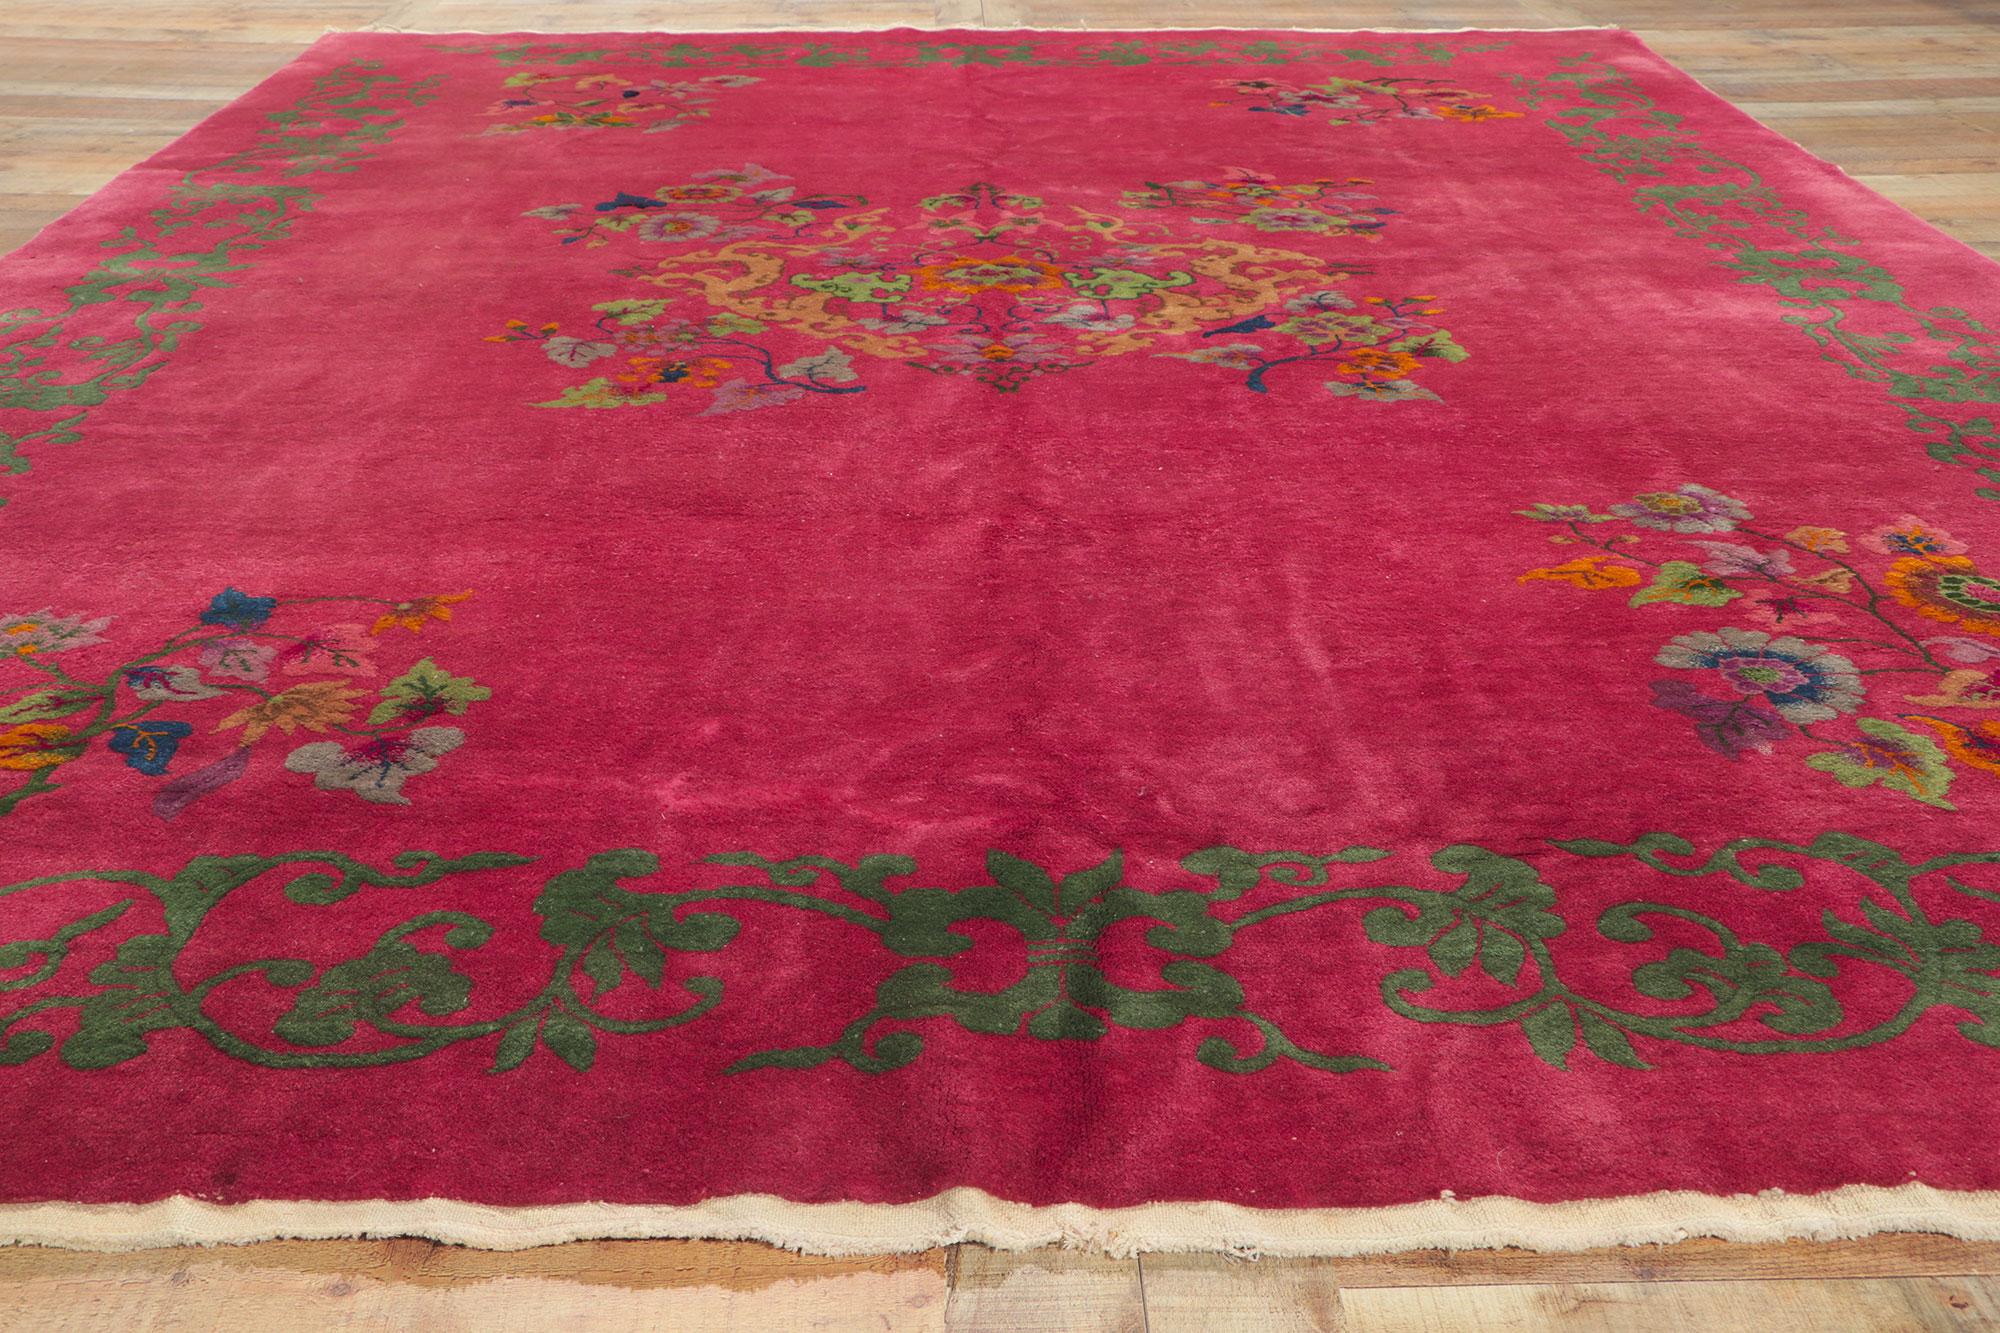 Antique Chinese Art Deco Rug, Sensual Decadence Meets Maximalist Style For Sale 2